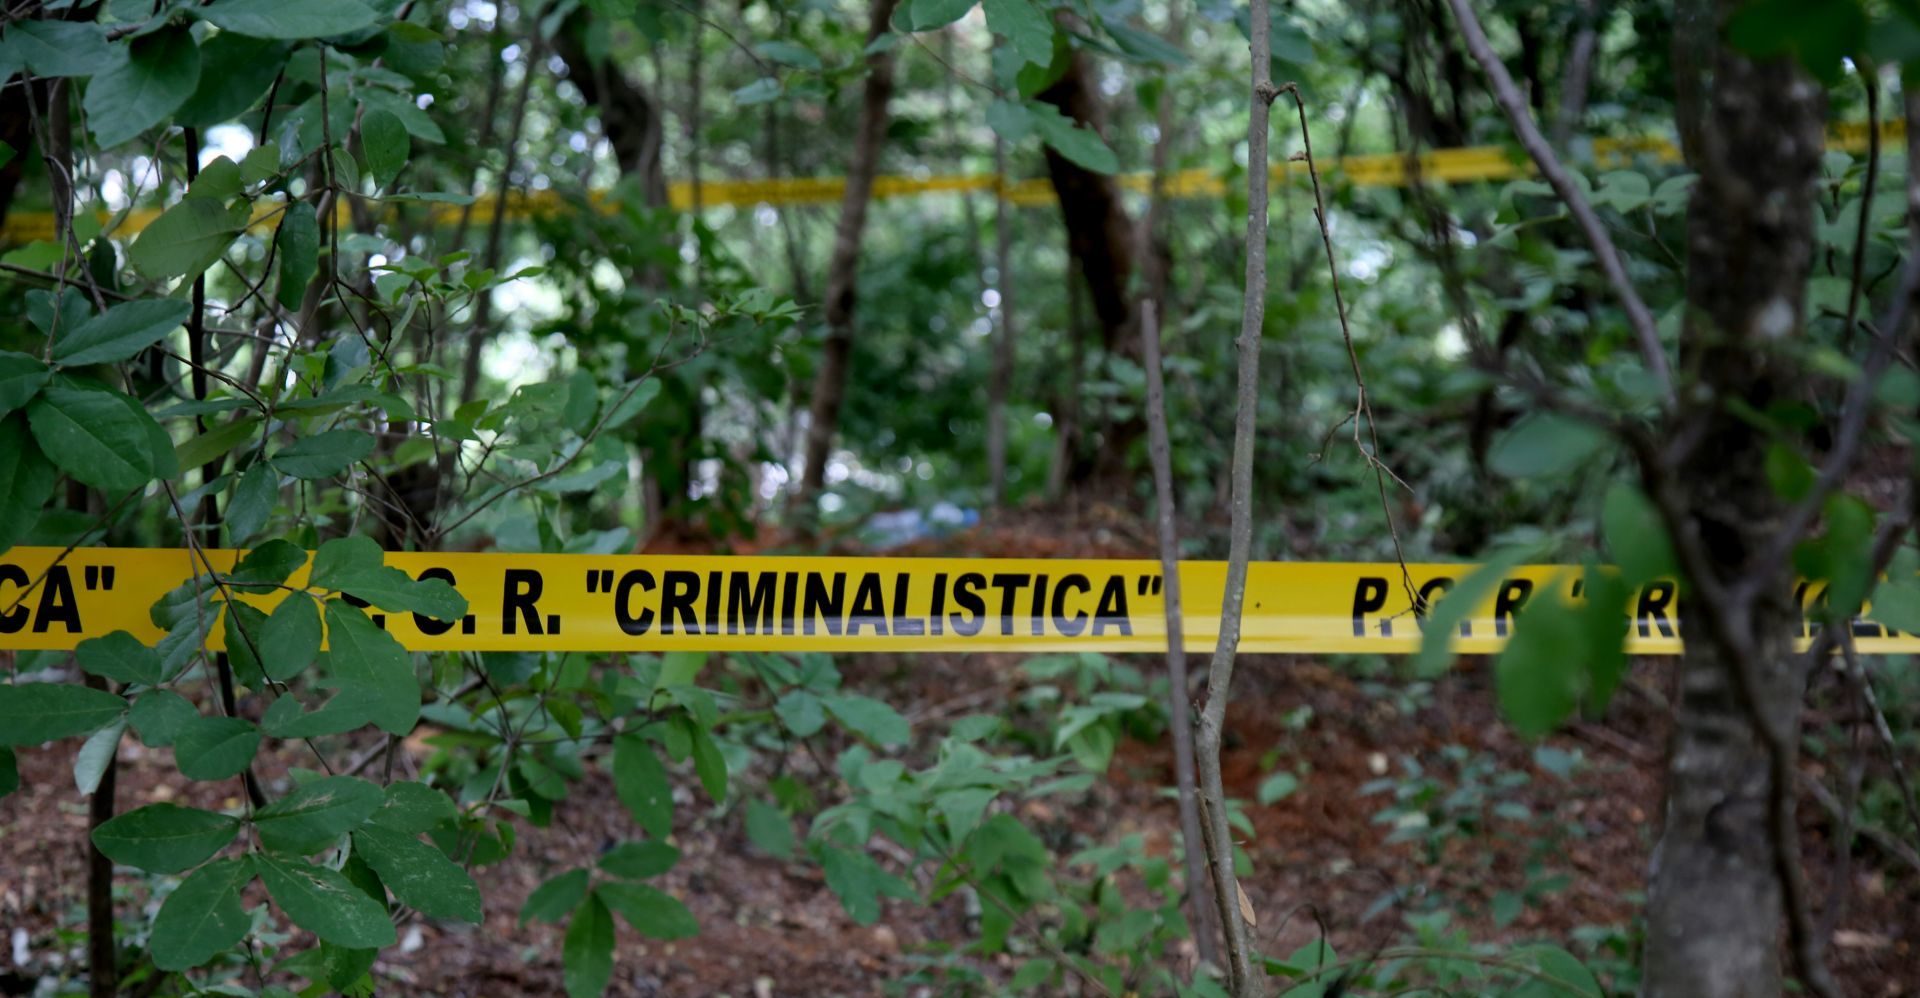 In two weeks they find 14 clandestine pits in Acámbaro, Guanajuato